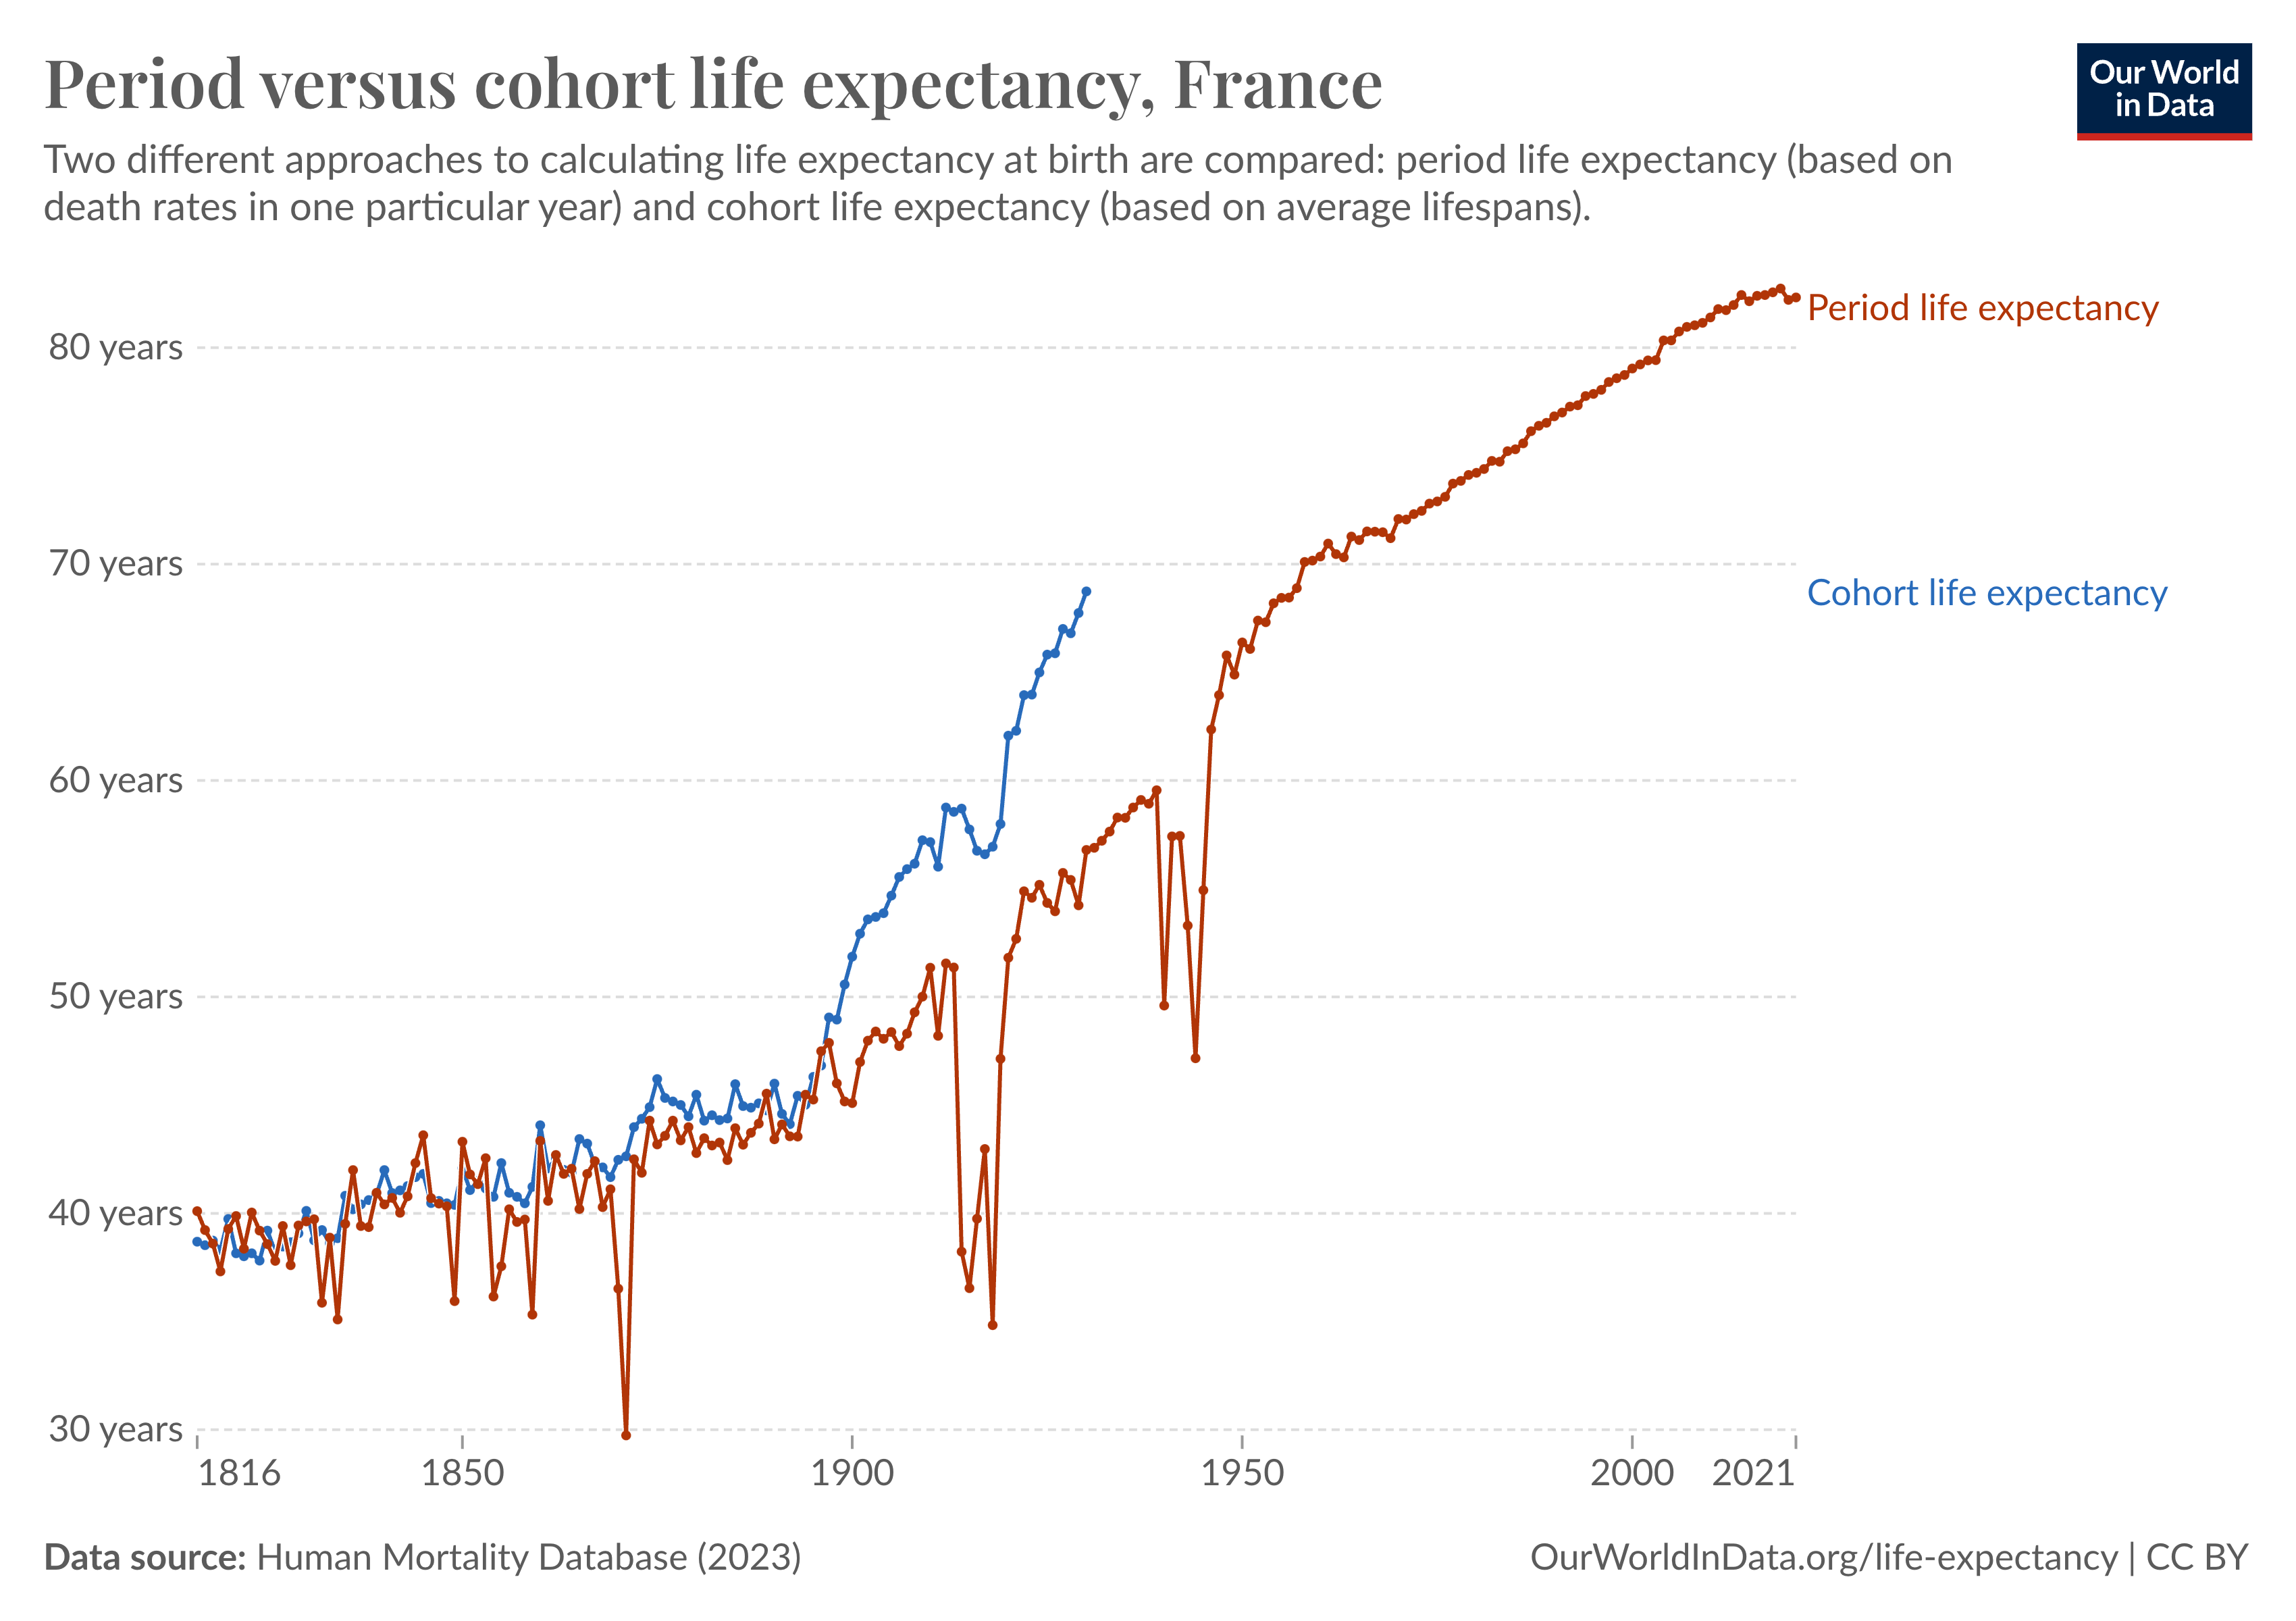 The chart shows a comparison between period and cohort life expectancy. Cohort life expectancy (the actual average lifespan) is higher than period life expectancy. This is because period life expectancy is calculated by assuming people will experience the current year’s mortality rates at each age at the corresponding ages in their lifetime.

But in reality, mortality rates declined throughout the 20th century, so people actually lived longer than what’s implied by period life expectancy.

Another reason for the difference is that period life expectancy is partly a reflection of conditions of the past that continue to affect older generations’ death rates today.

You can also see that the trendline of cohort life expectancy ends decades ago. It can only be measured retrospectively, because researchers need to wait for data on deaths of the population who were born more recently.